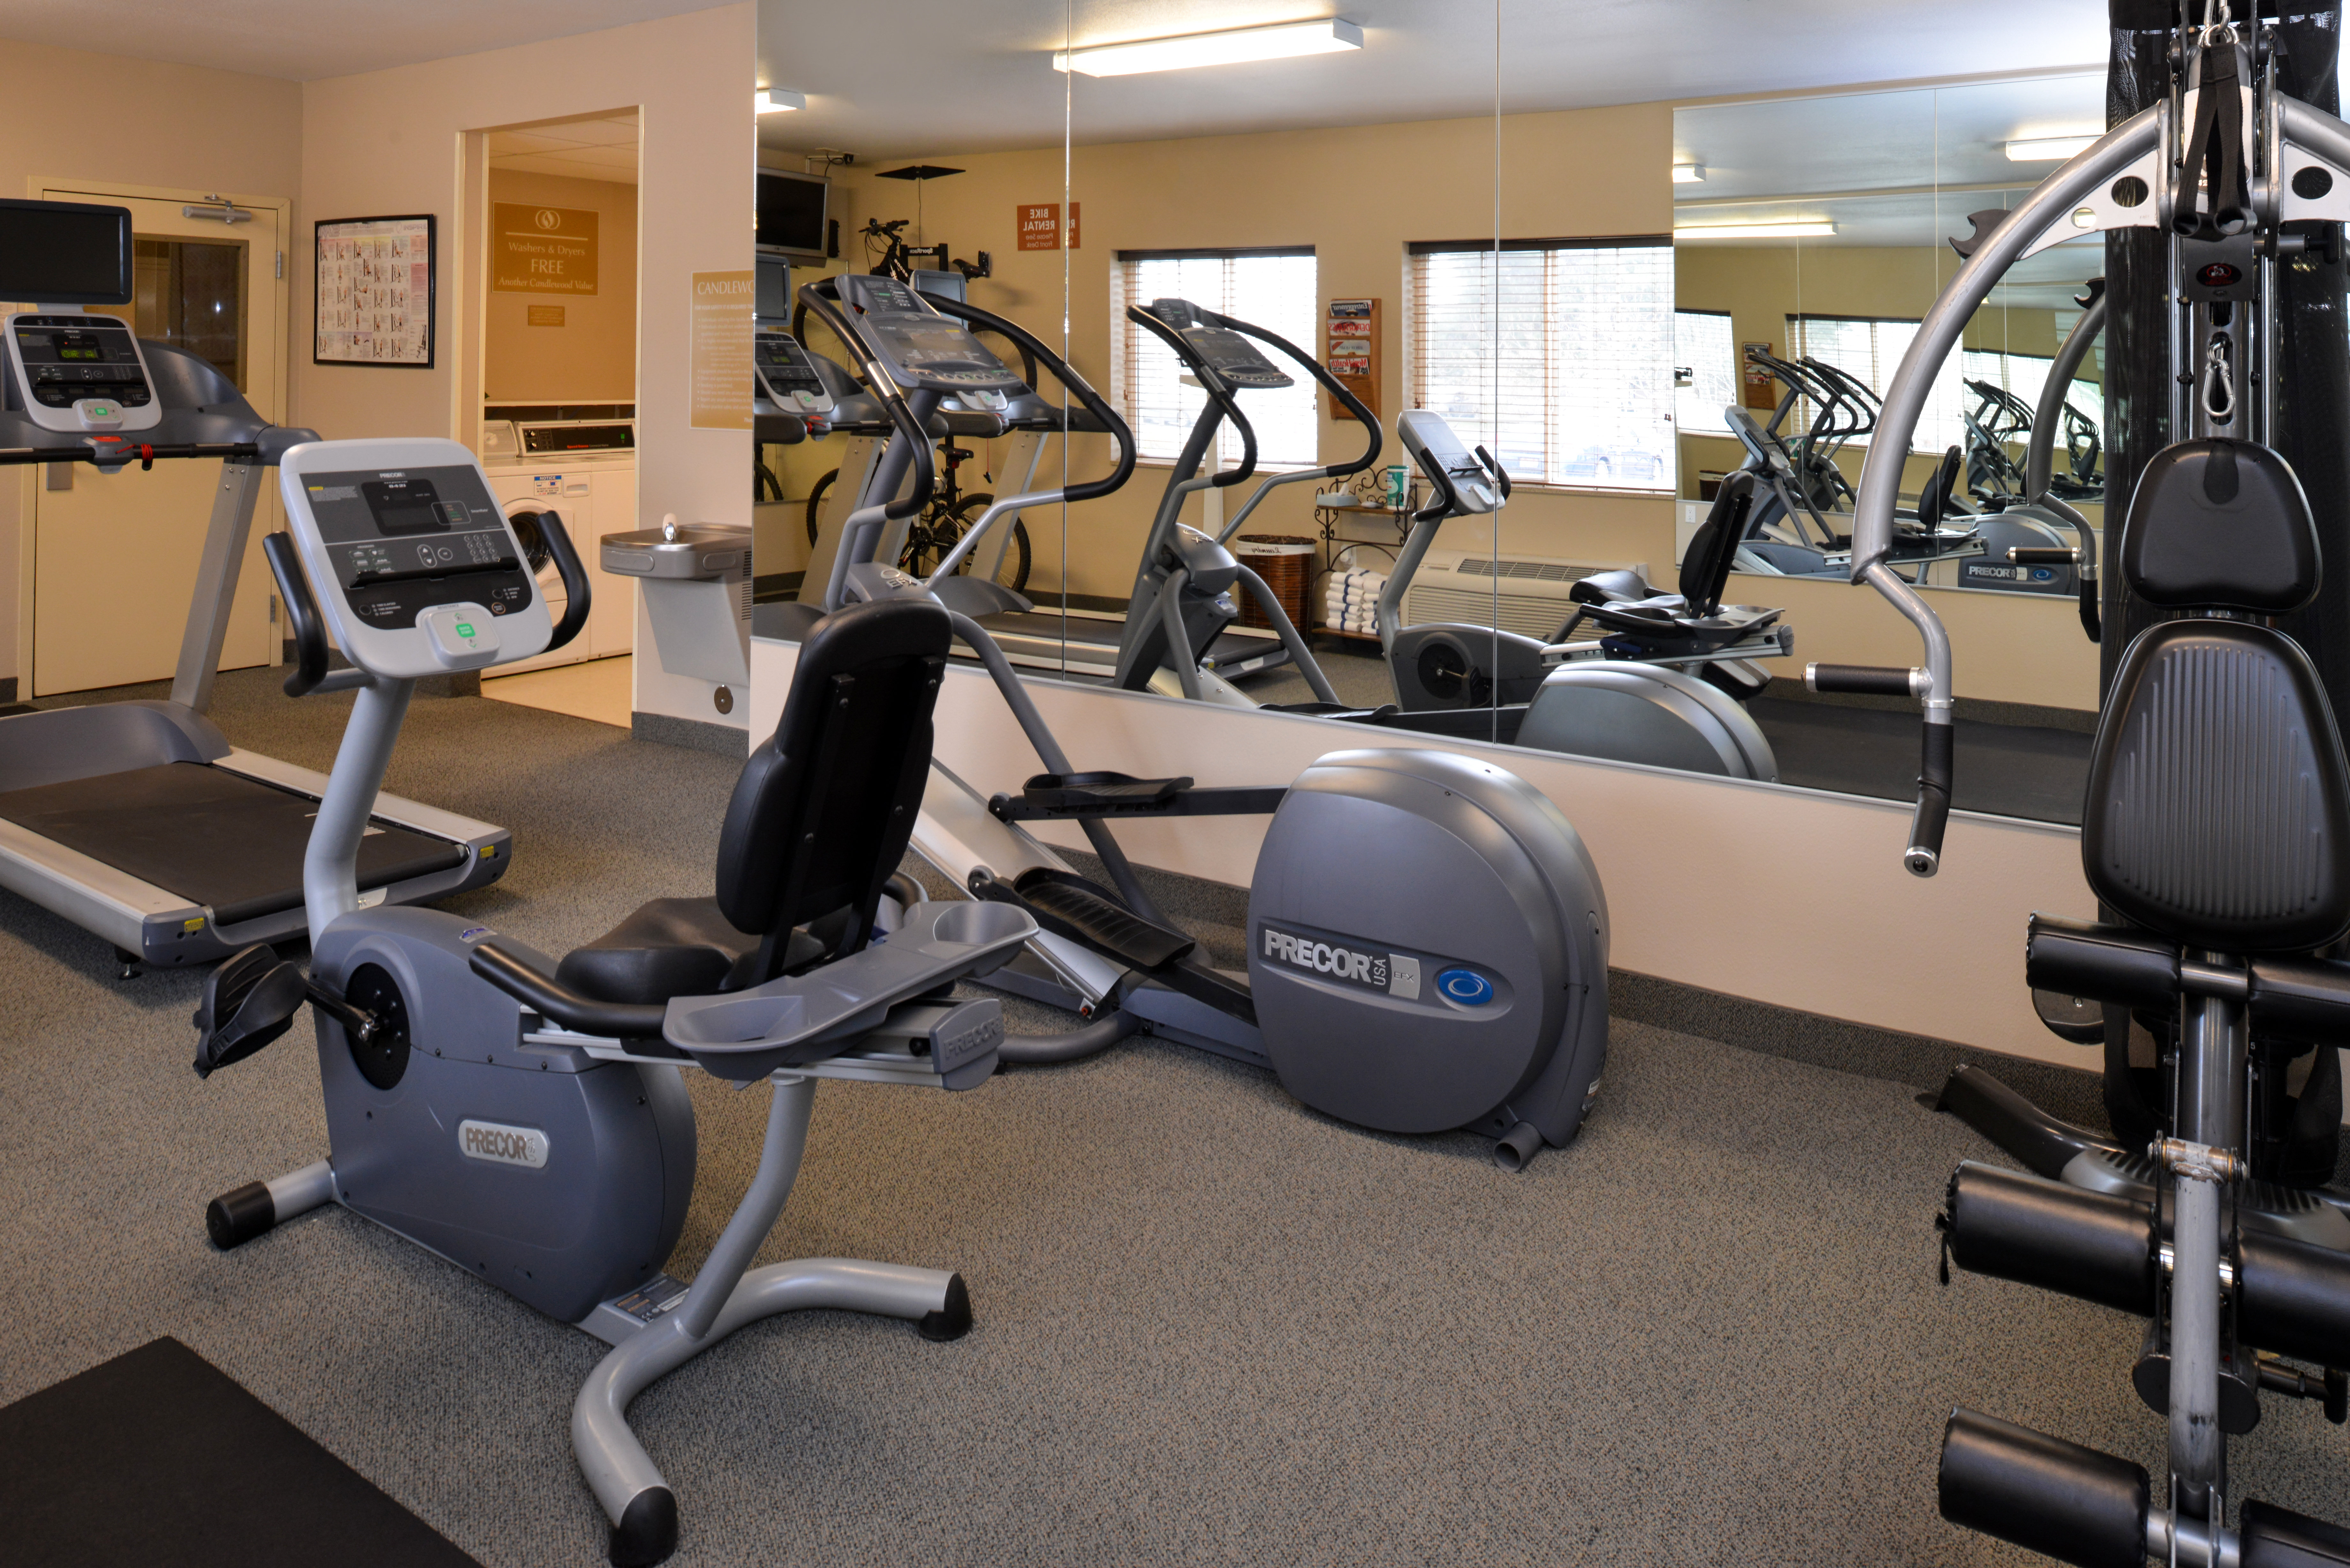 Fully equipped gym with lots of aerobic and weight equipment. 